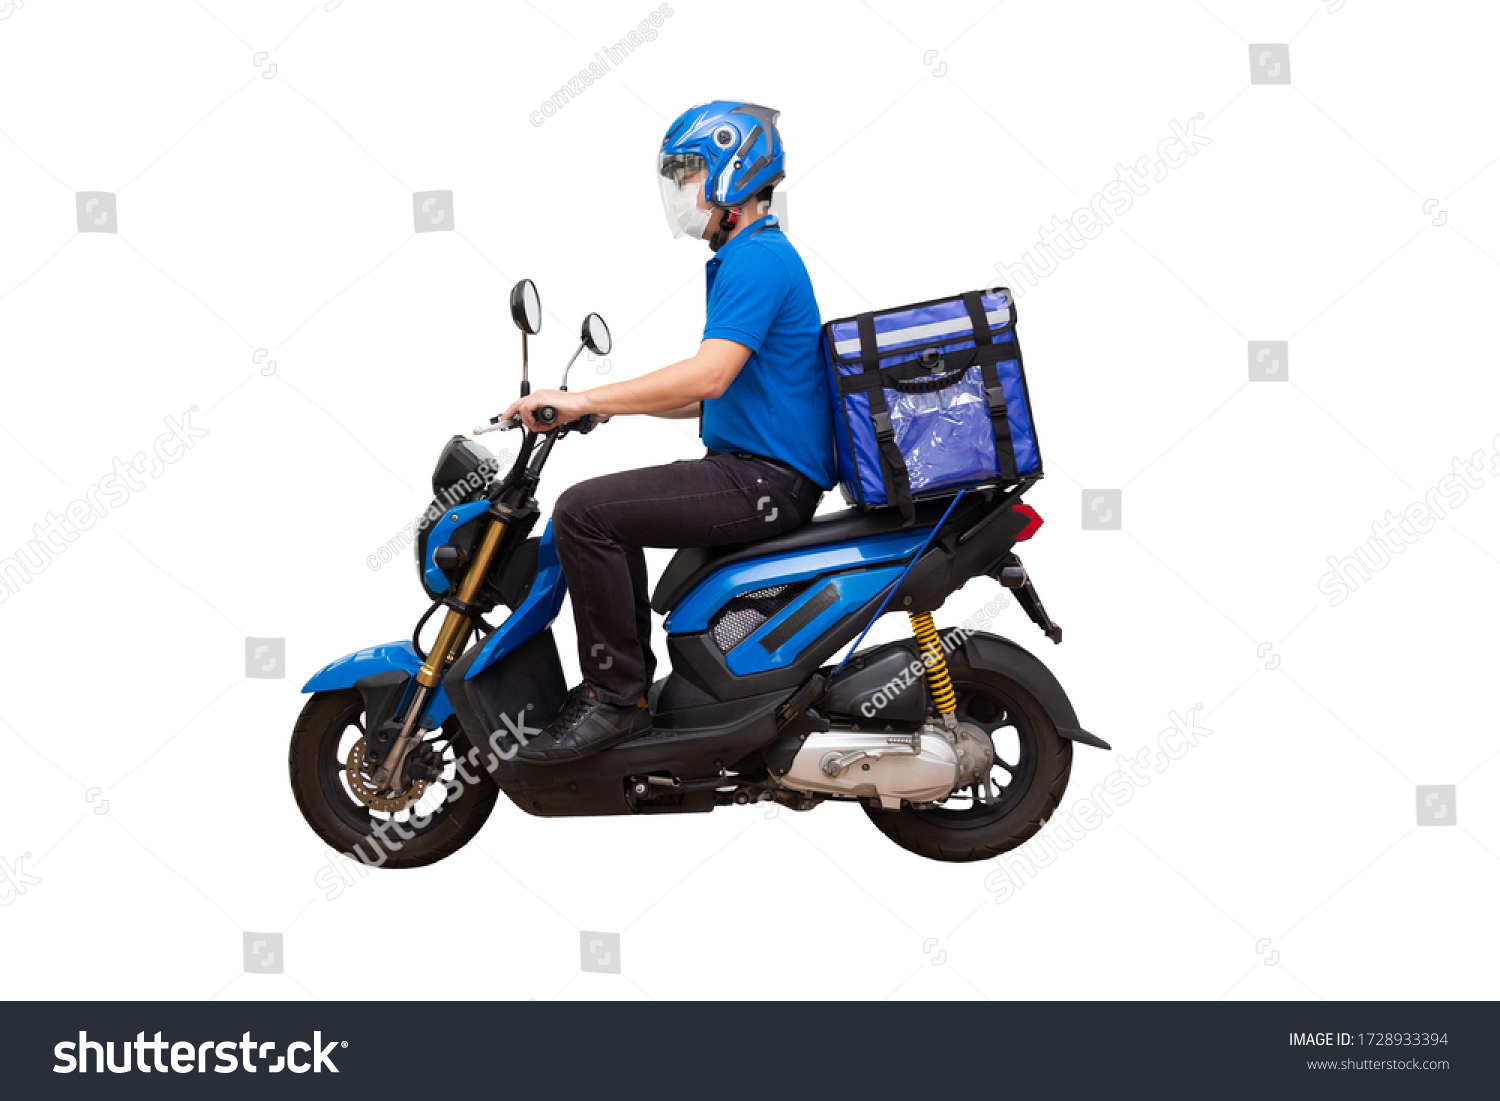 Delivery man wearing blue uniform riding motorcycle and delivery box. Motorbike delivering food or parcel express service isolated on white background #1728933394